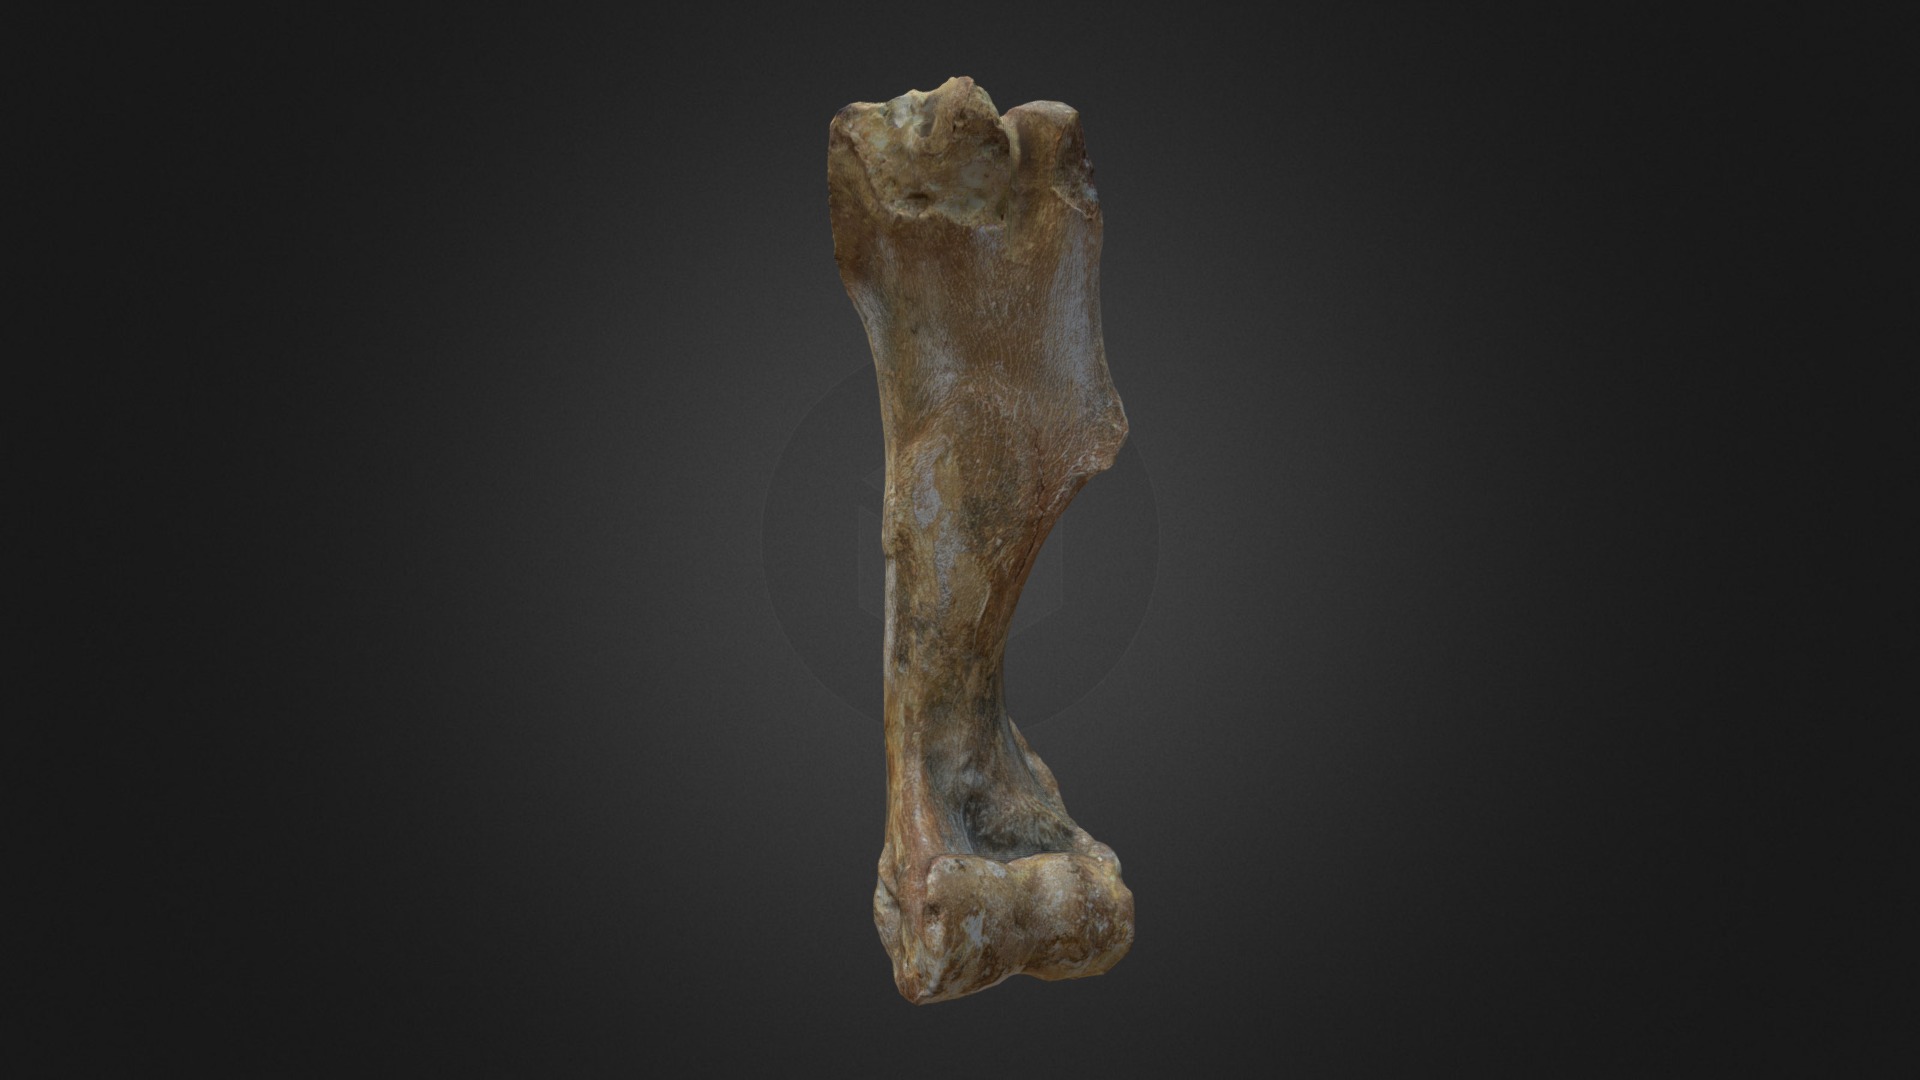 3D model Horse Humerus - This is a 3D model of the Horse Humerus. The 3D model is about a bone on a black background.